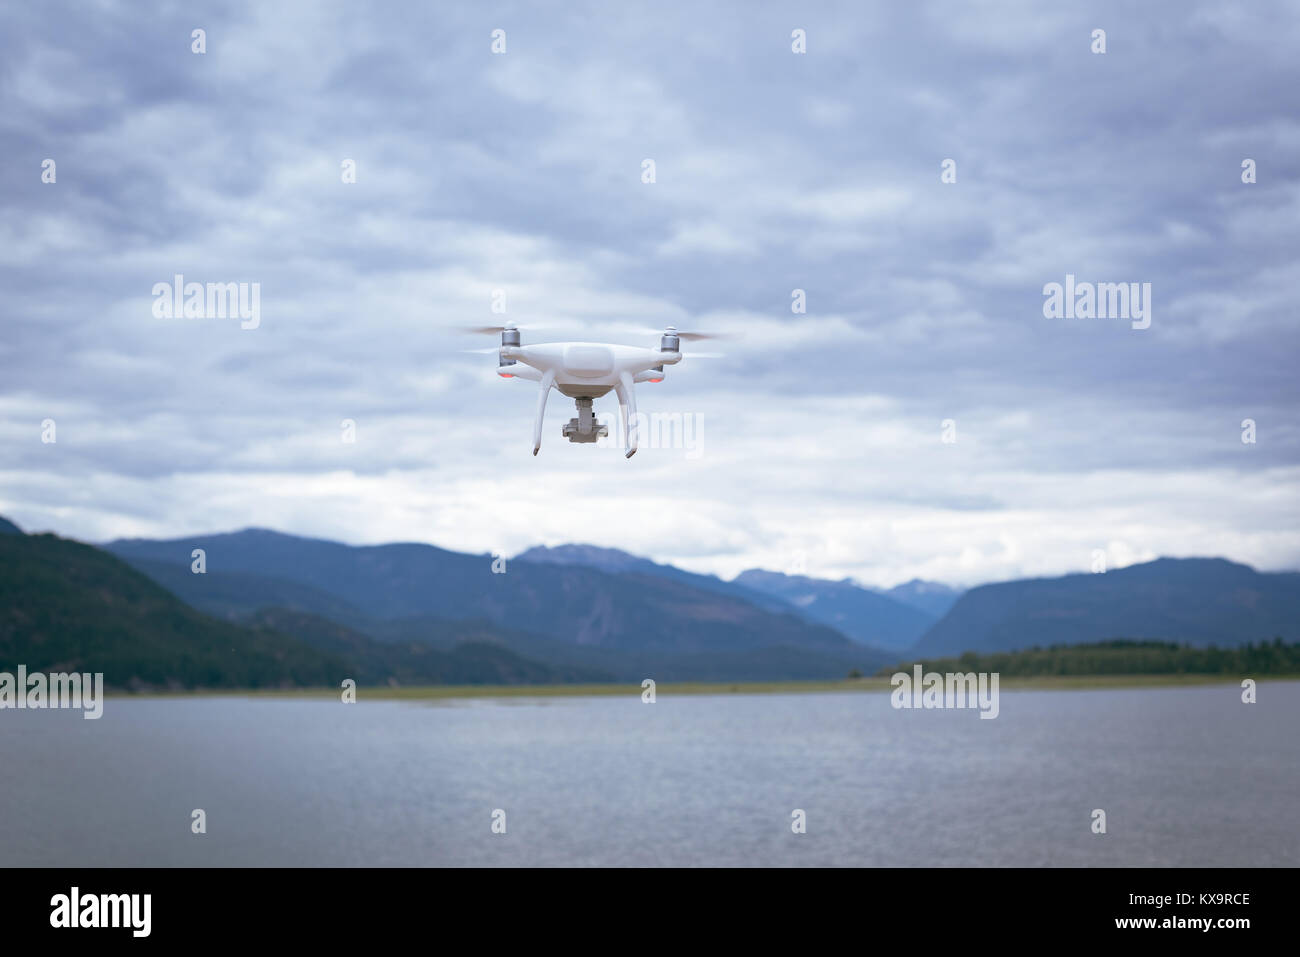 Drone flying over a river Stock Photo